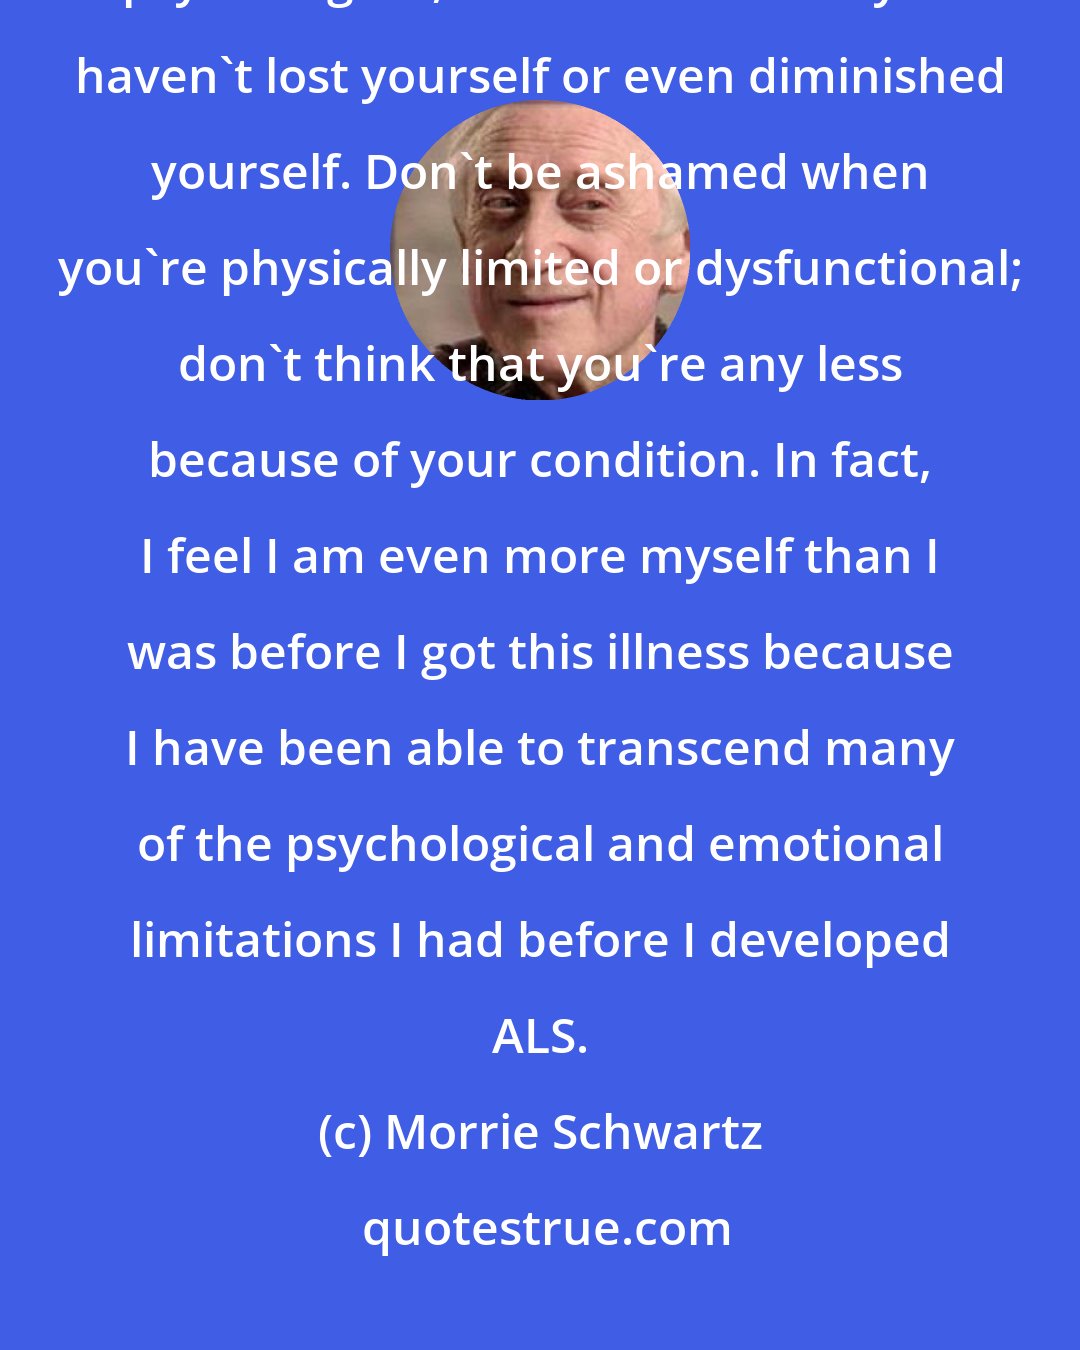 Morrie Schwartz: My contention is that as long as you have other faculties-the emotional, psychological, intuitive faculties-you haven't lost yourself or even diminished yourself. Don't be ashamed when you're physically limited or dysfunctional; don't think that you're any less because of your condition. In fact, I feel I am even more myself than I was before I got this illness because I have been able to transcend many of the psychological and emotional limitations I had before I developed ALS.